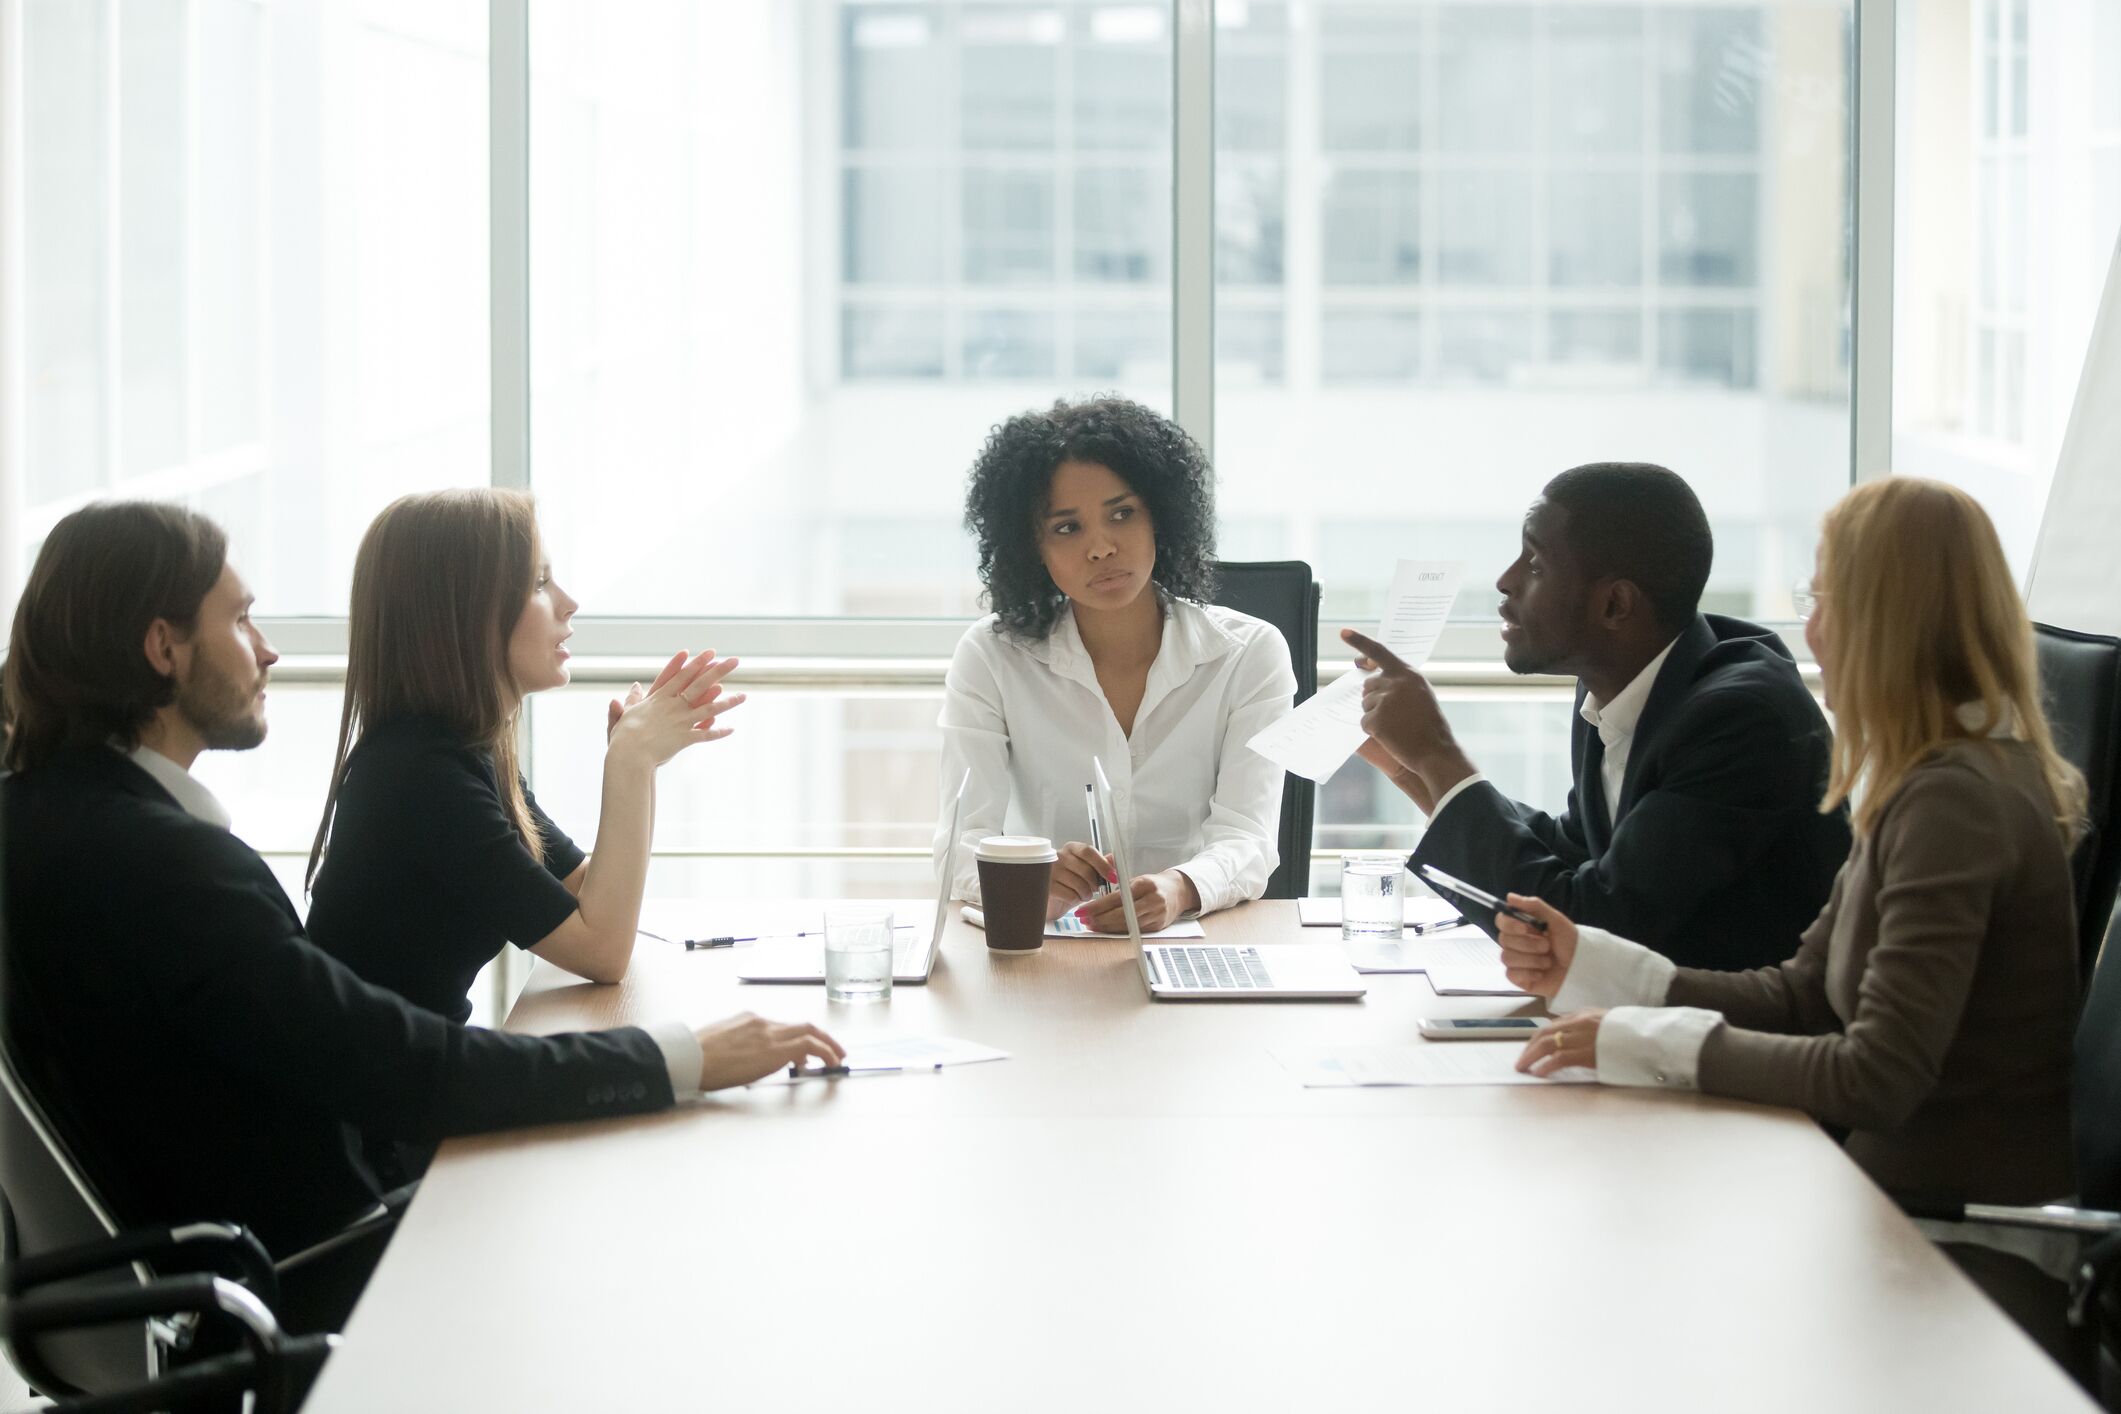 Business dispute being discussed by 5 people in a conference room